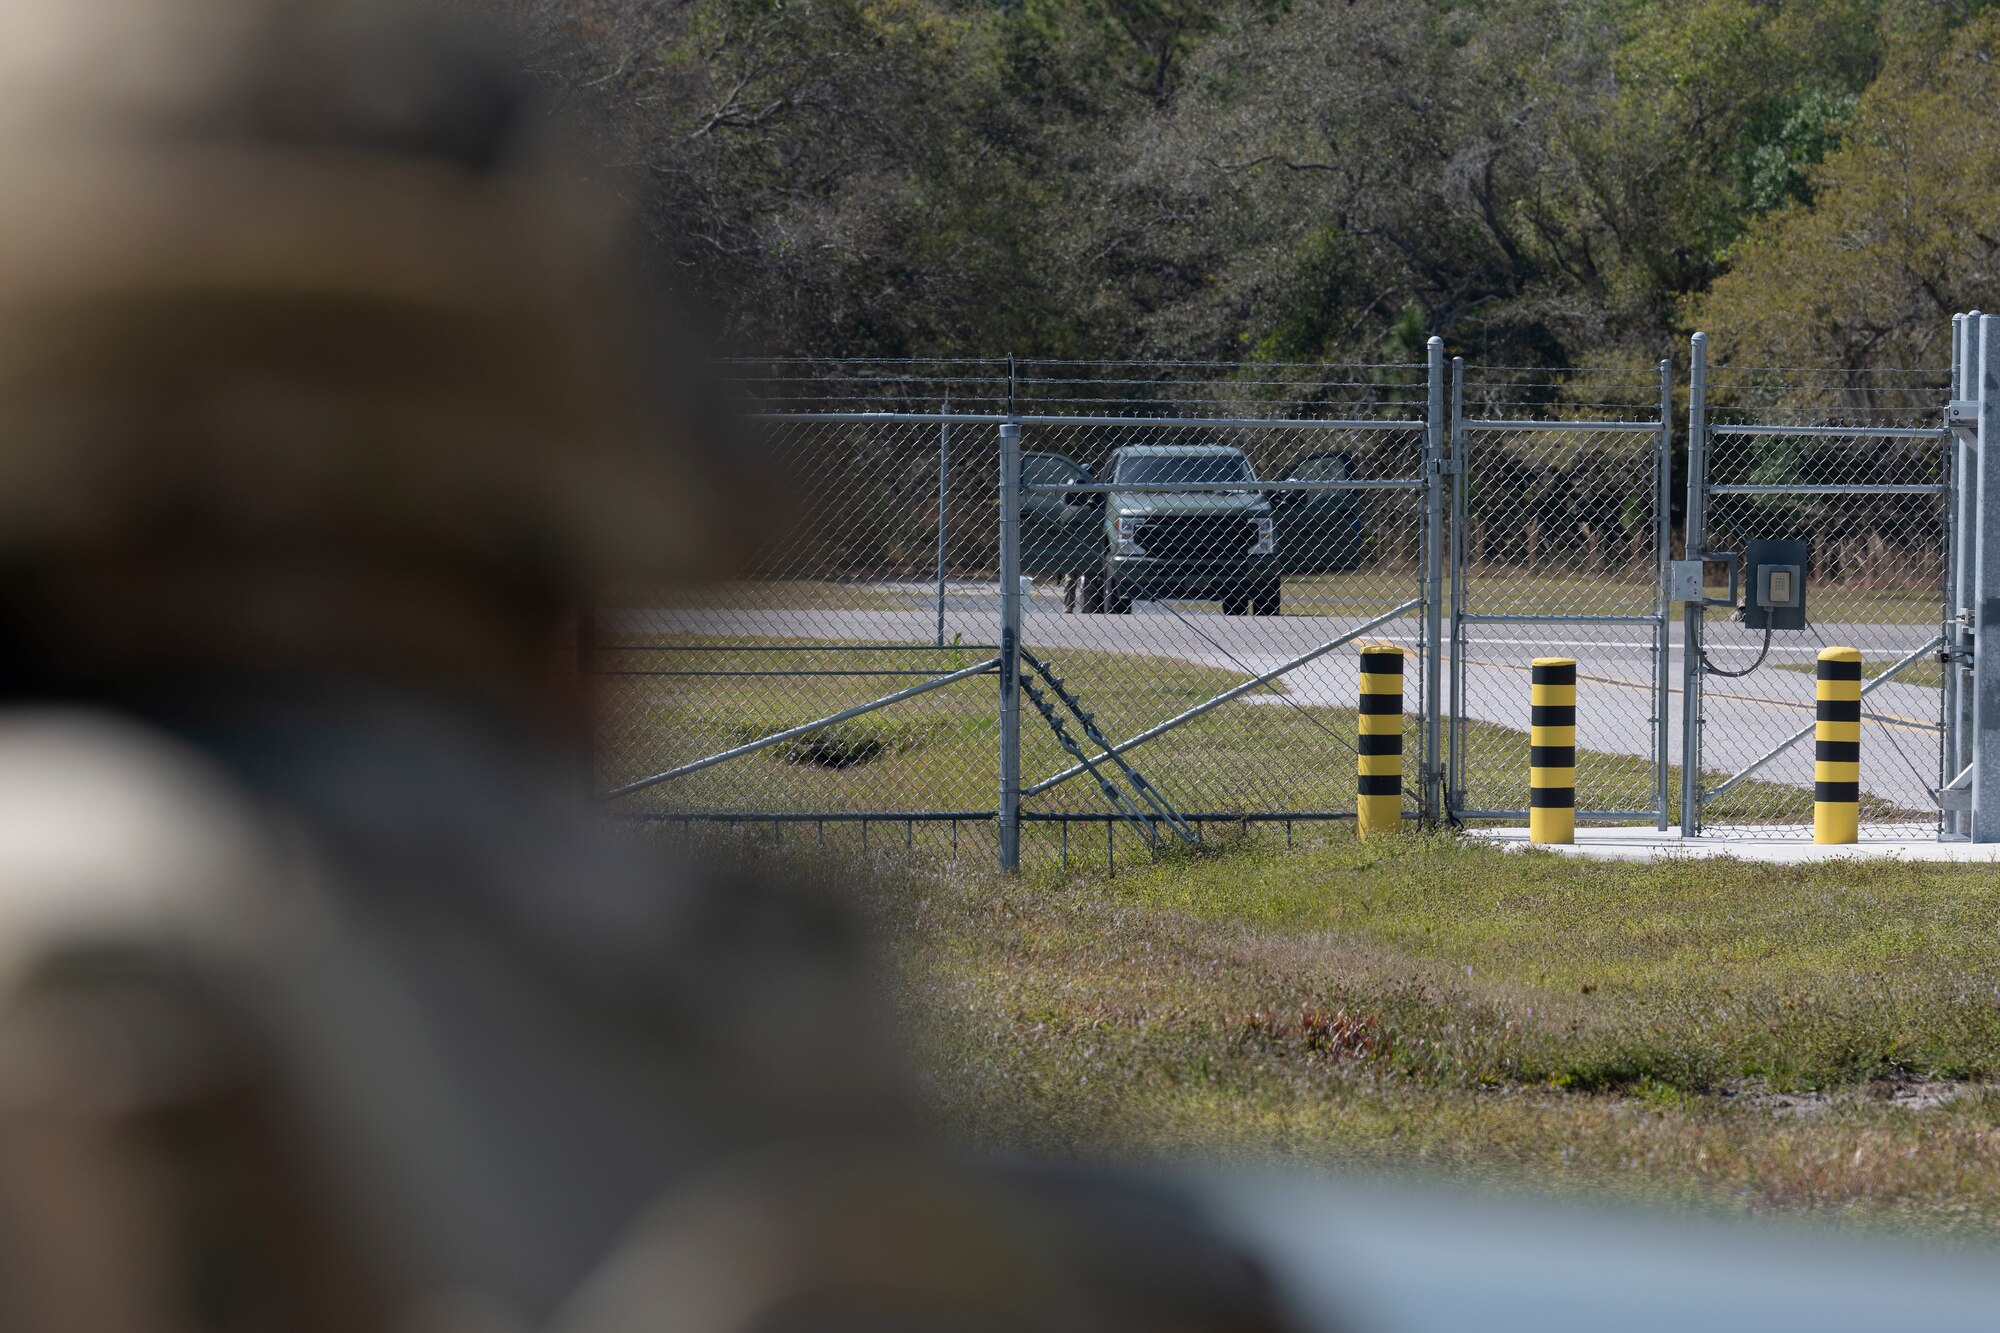 A U.S. Airman with the 156th Contingency Response Group, Puerto Rico Air National Guard, aims at opposing forces in support of agile combat employment operations during the Agile Rage exercise, Avon Park, Florida, Feb. 28, 2024. Agile Rage 2024 is a National Guard Bureau (NGB)/A3 led military exercise, hosted at the Air Dominance Center, taking place from February 26 to March 8, 2024 that involves the collaborative efforts of various Air National Guard Wings conducting joint counter-land and combat search and rescue (CSAR) operations in a simulated medium to high threat environment. (U.S. Air National Guard photo by Master Sgt. Rafael D. Rosa)